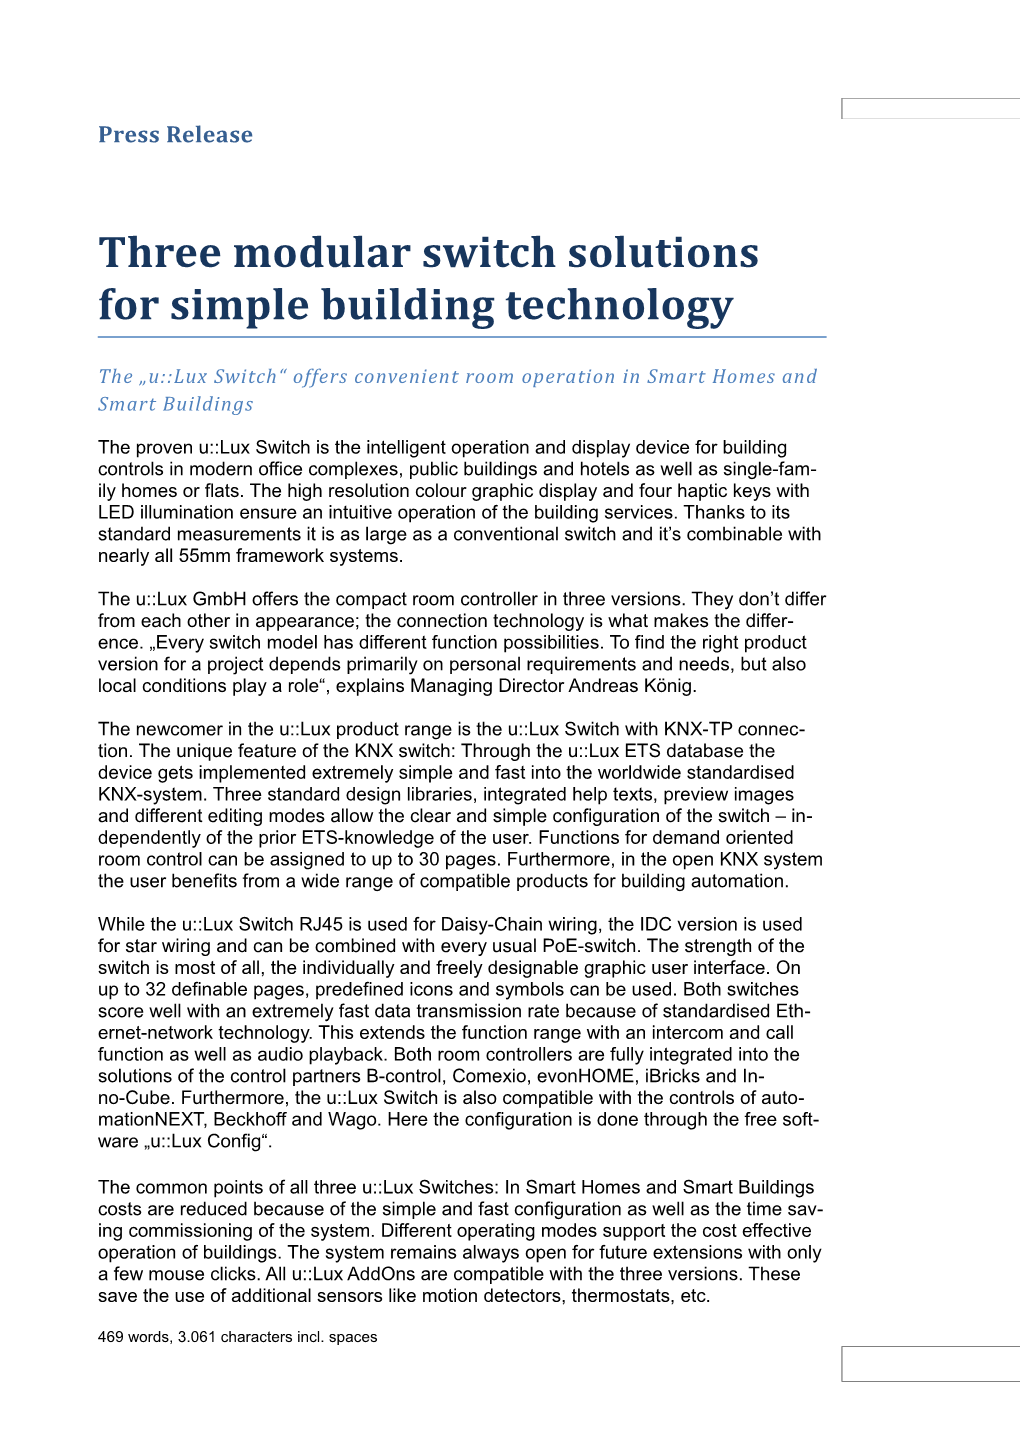 Three Modular Switch Solutions for Simple Building Technology